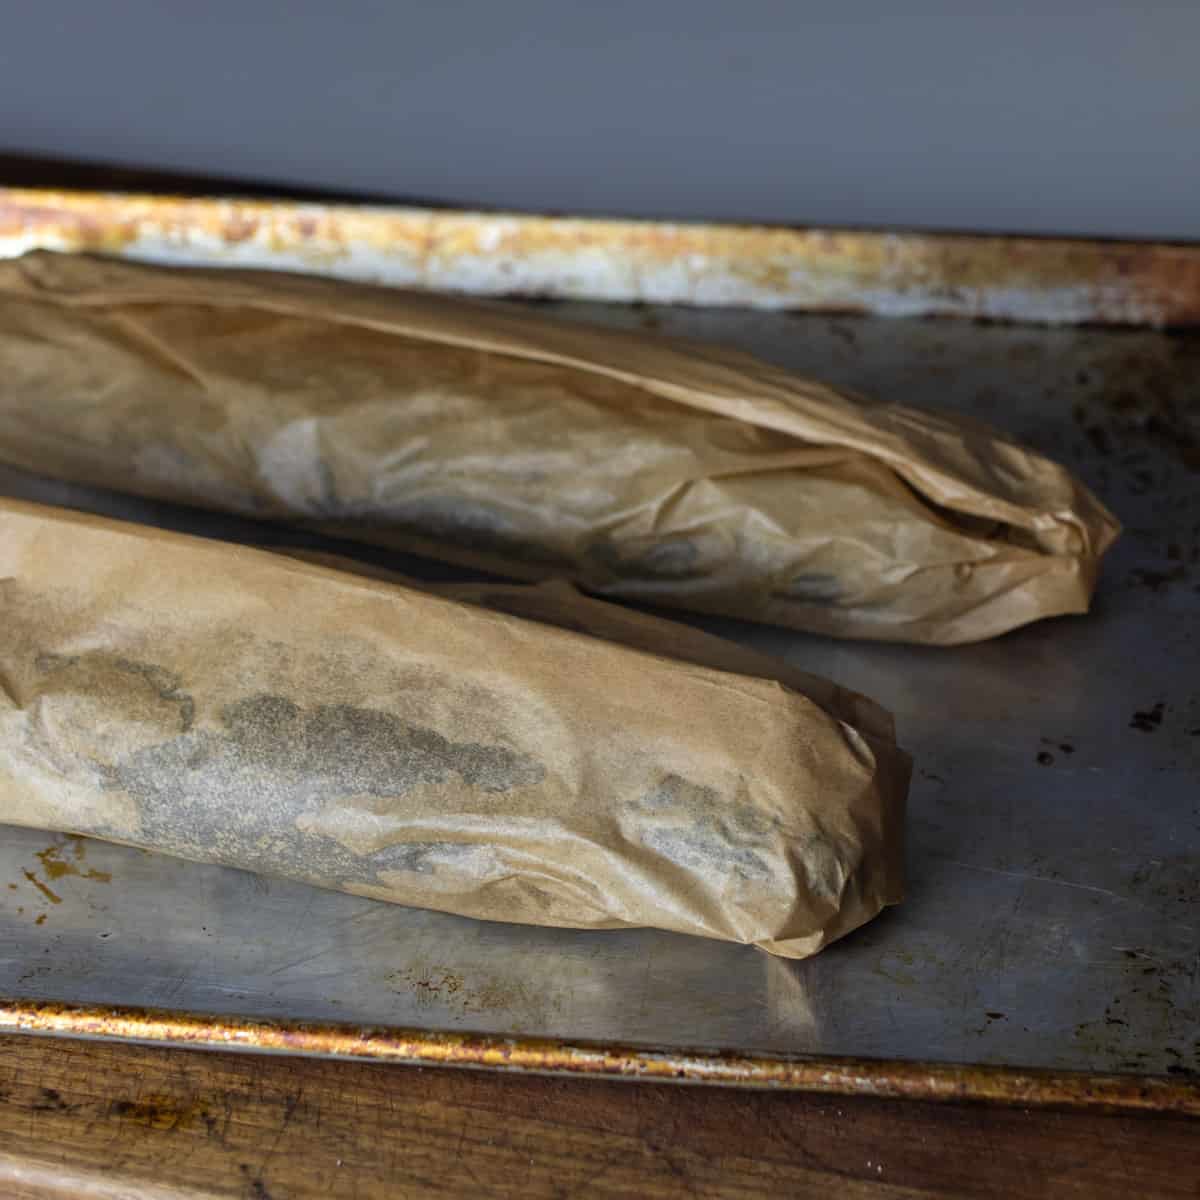 Two fish wrapped in paper and lying on a baking sheet.